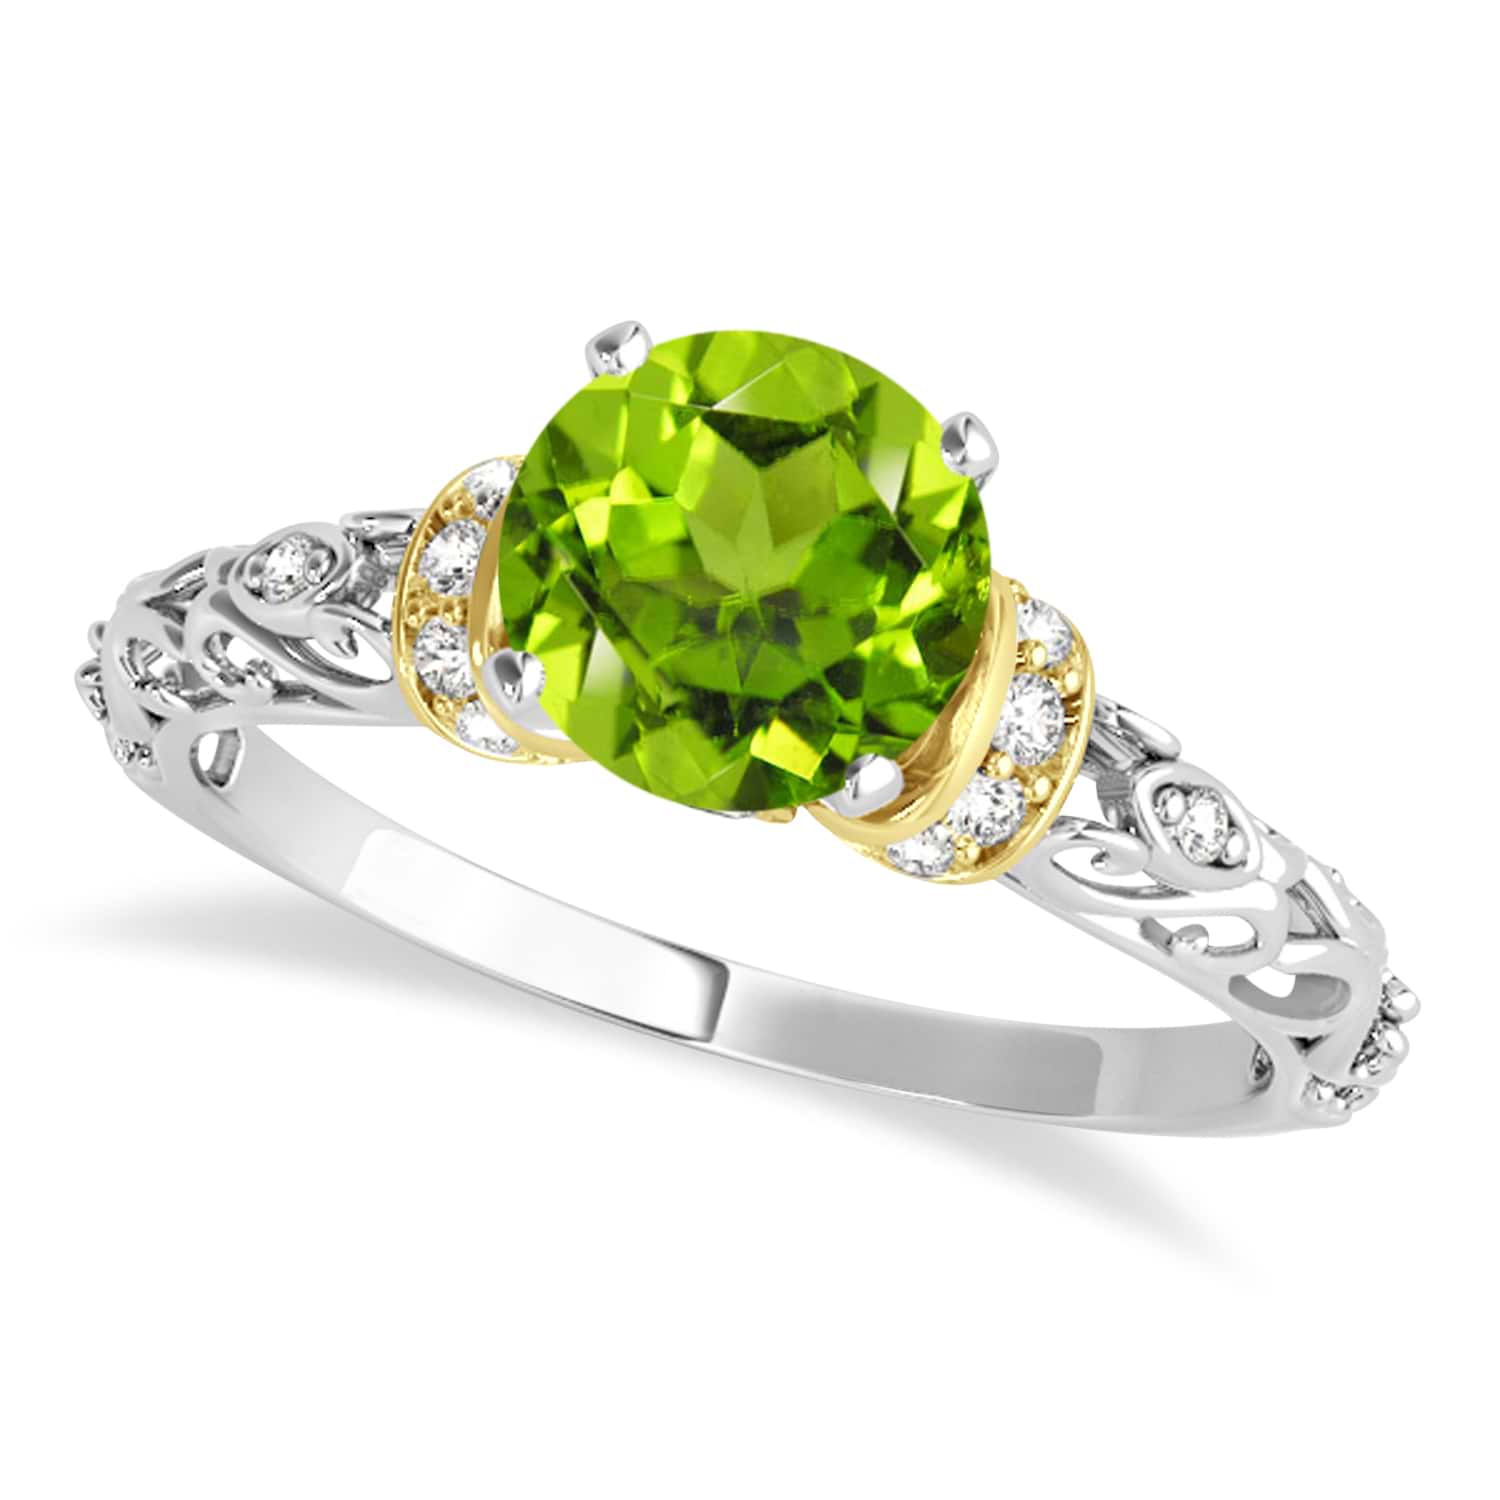 Peridot & Diamond Antique Style Engagement Ring 14k Two-Tone Gold (0.87ct)